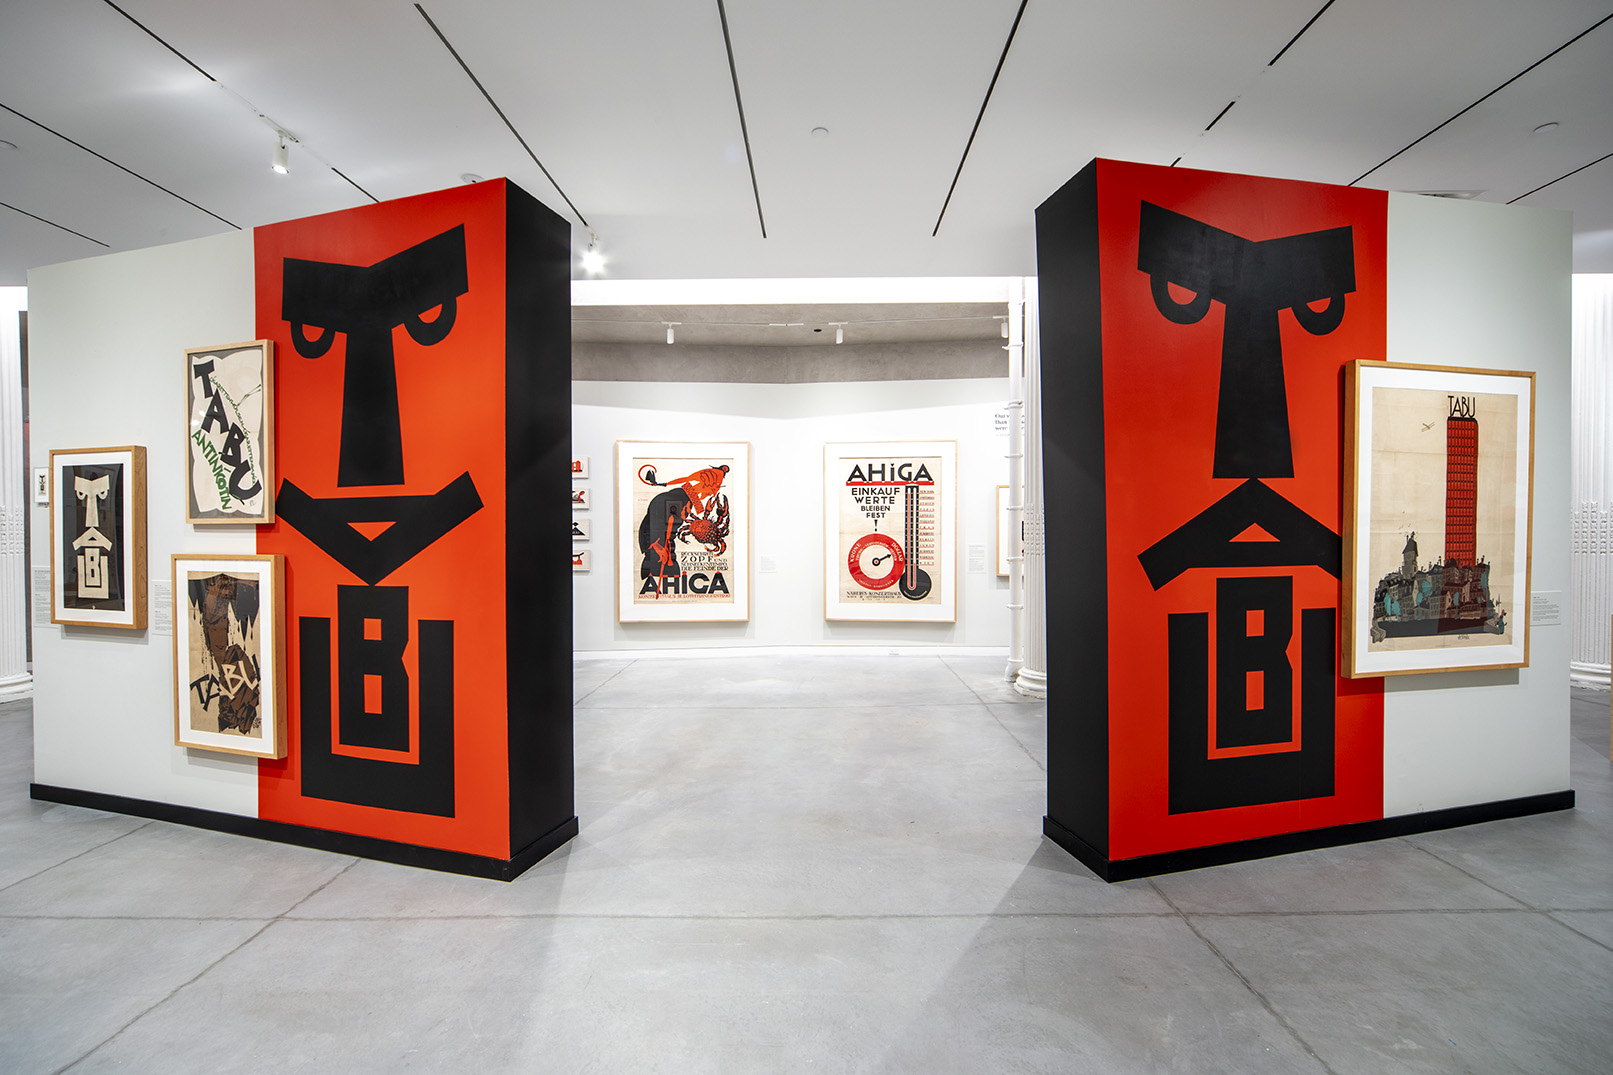 A Julius Klinger show displaying two separate freestanding walls at an entrance forming a face by stacking letters TABU at each end.